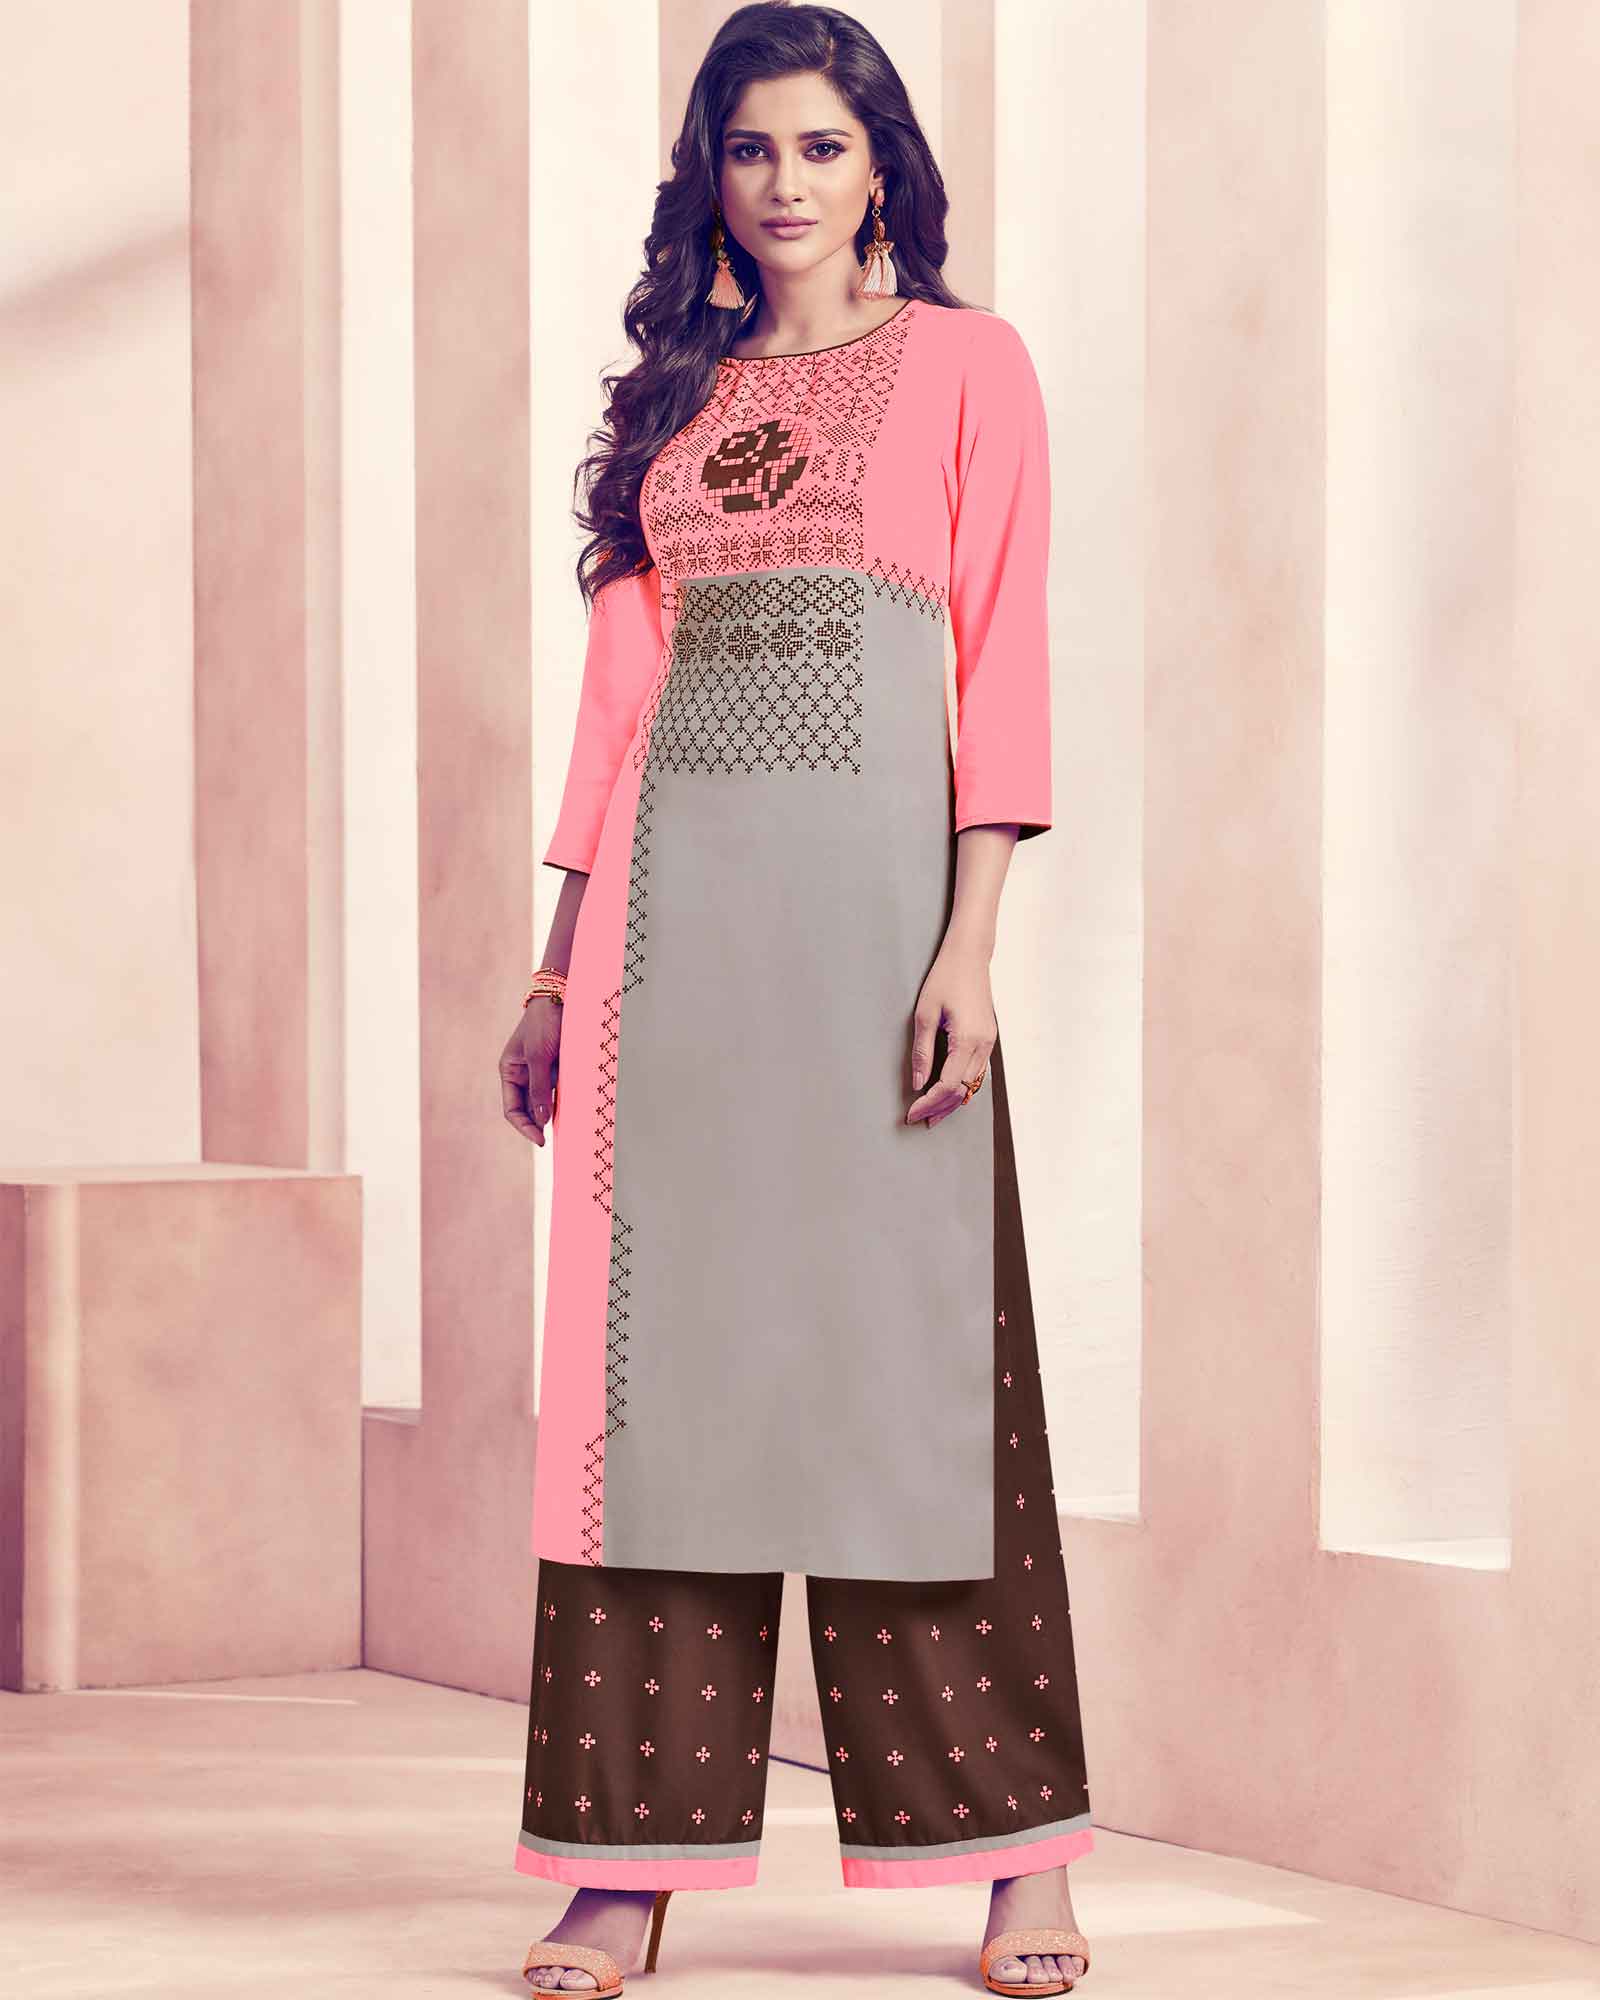 Look Stylish with These Trendy Women Long Salwar Suit Designs